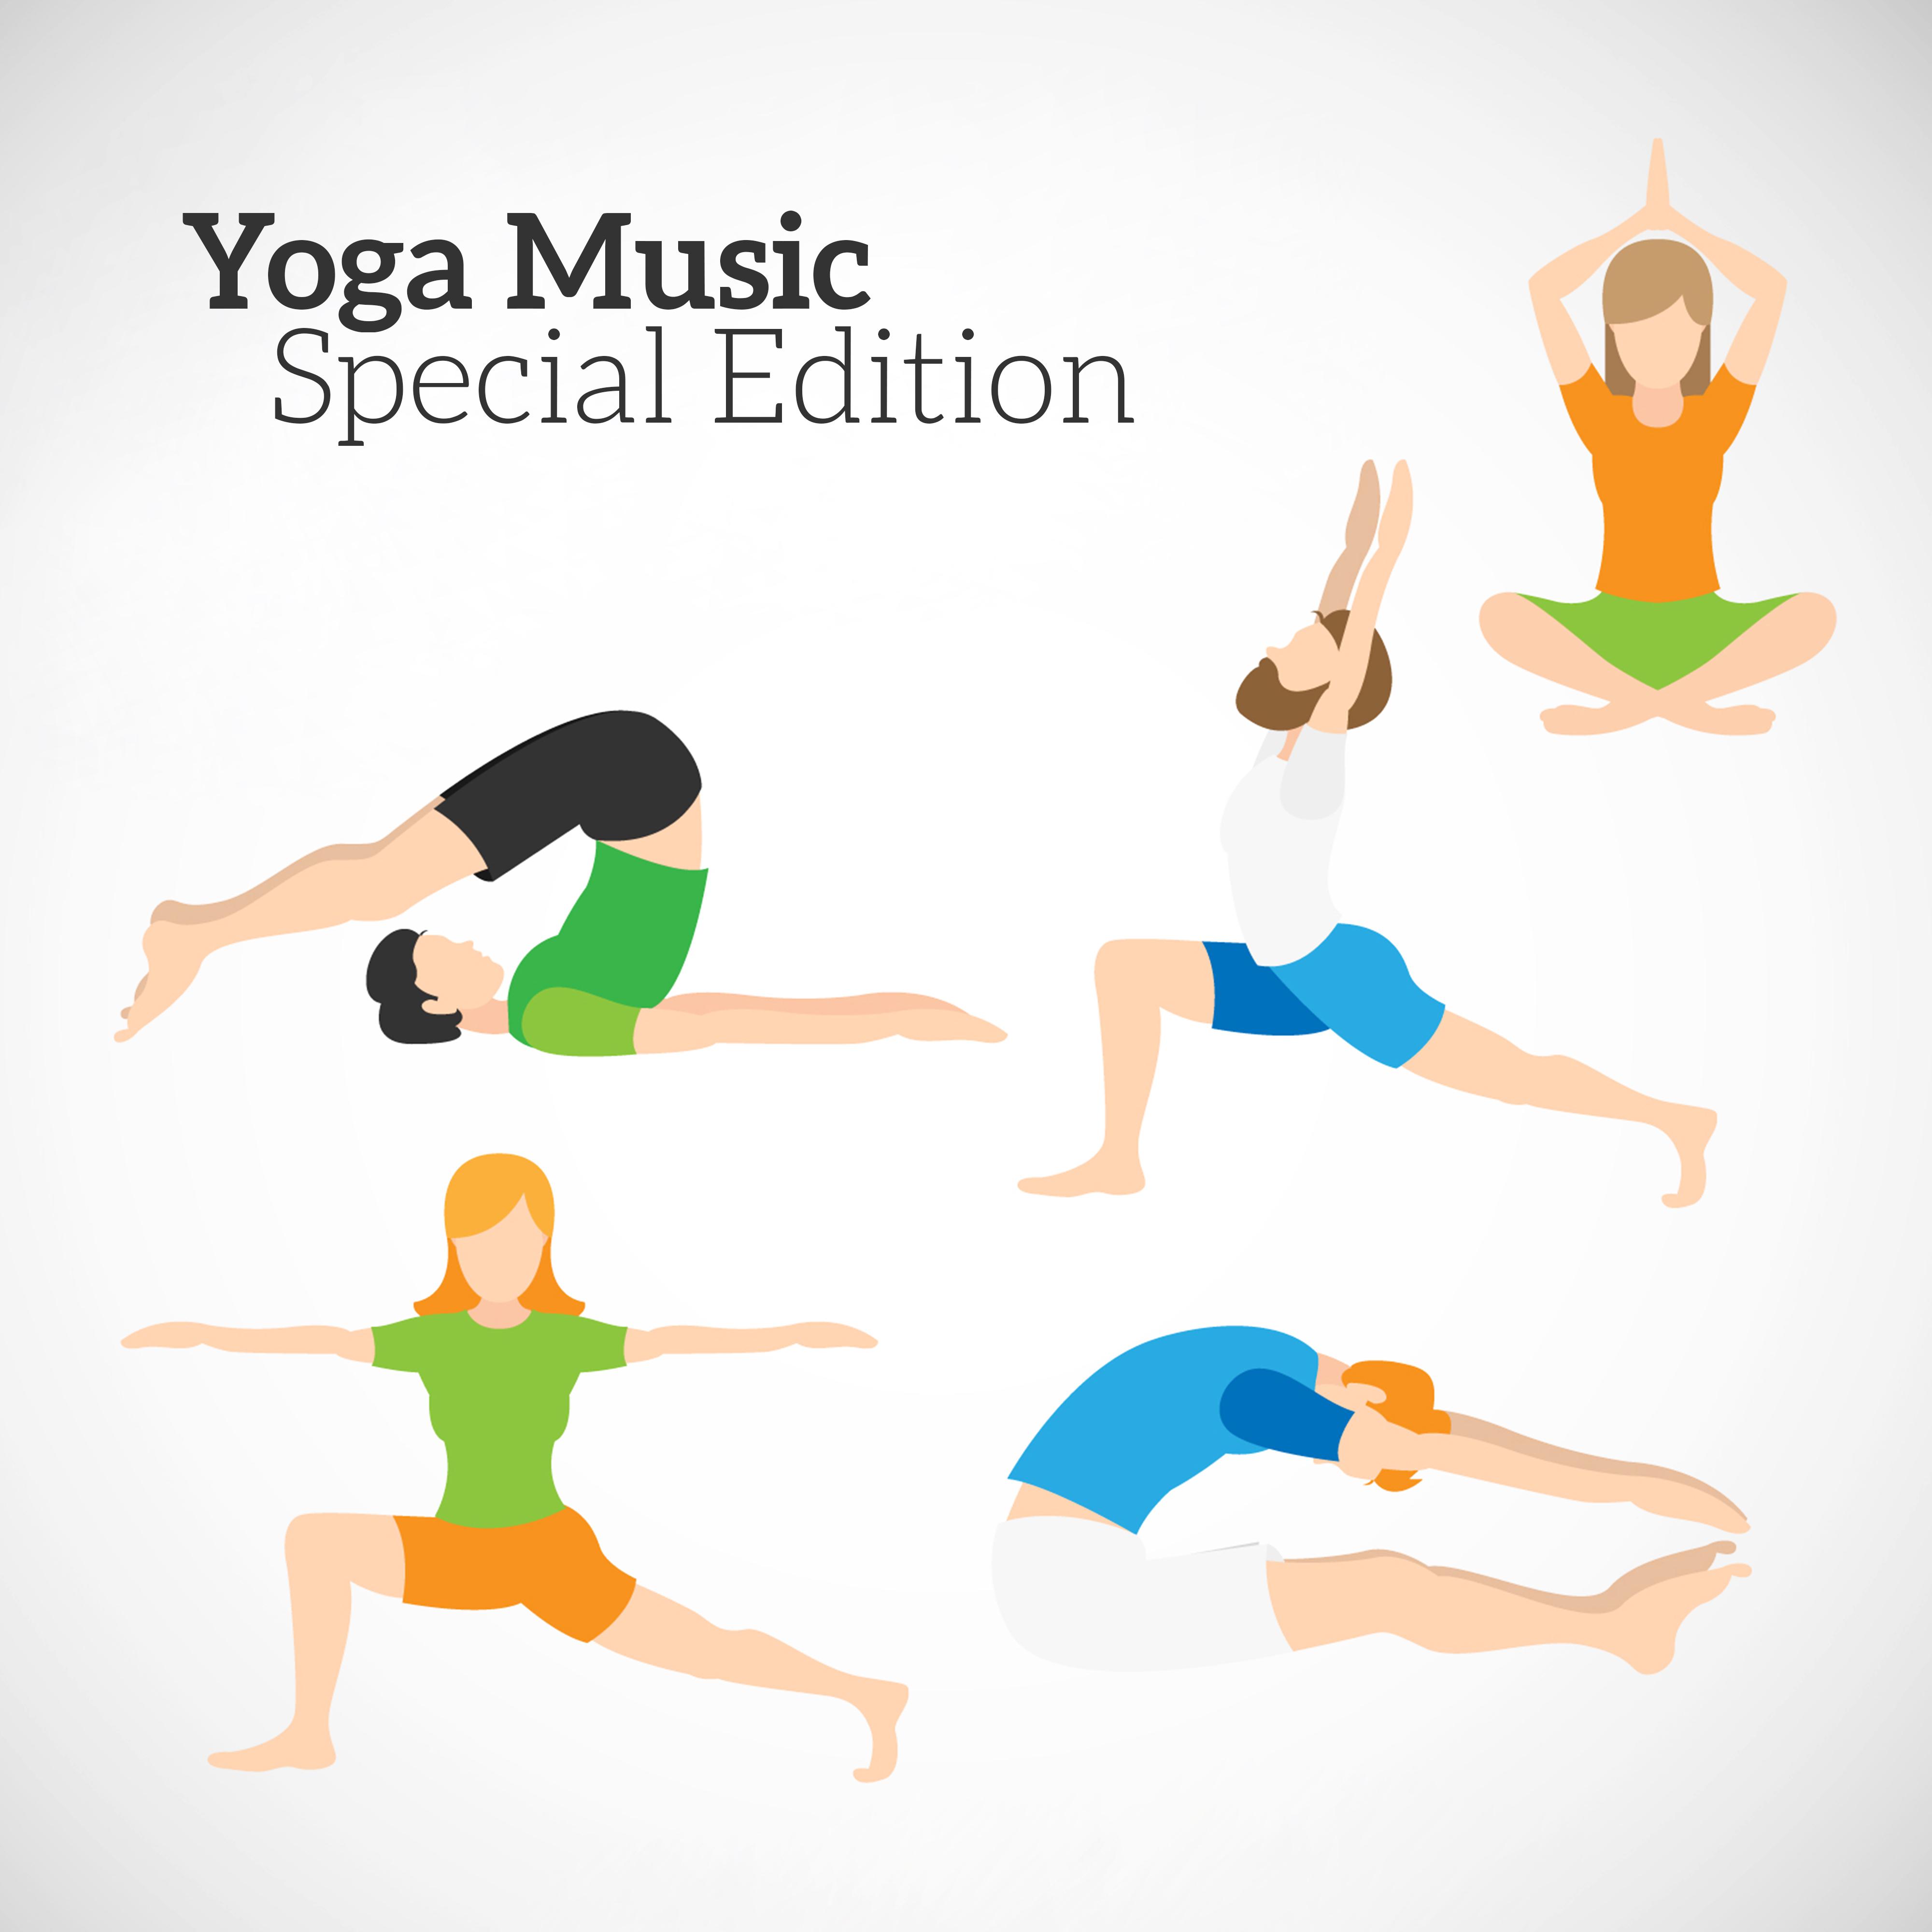 Yoga Music Special Edition